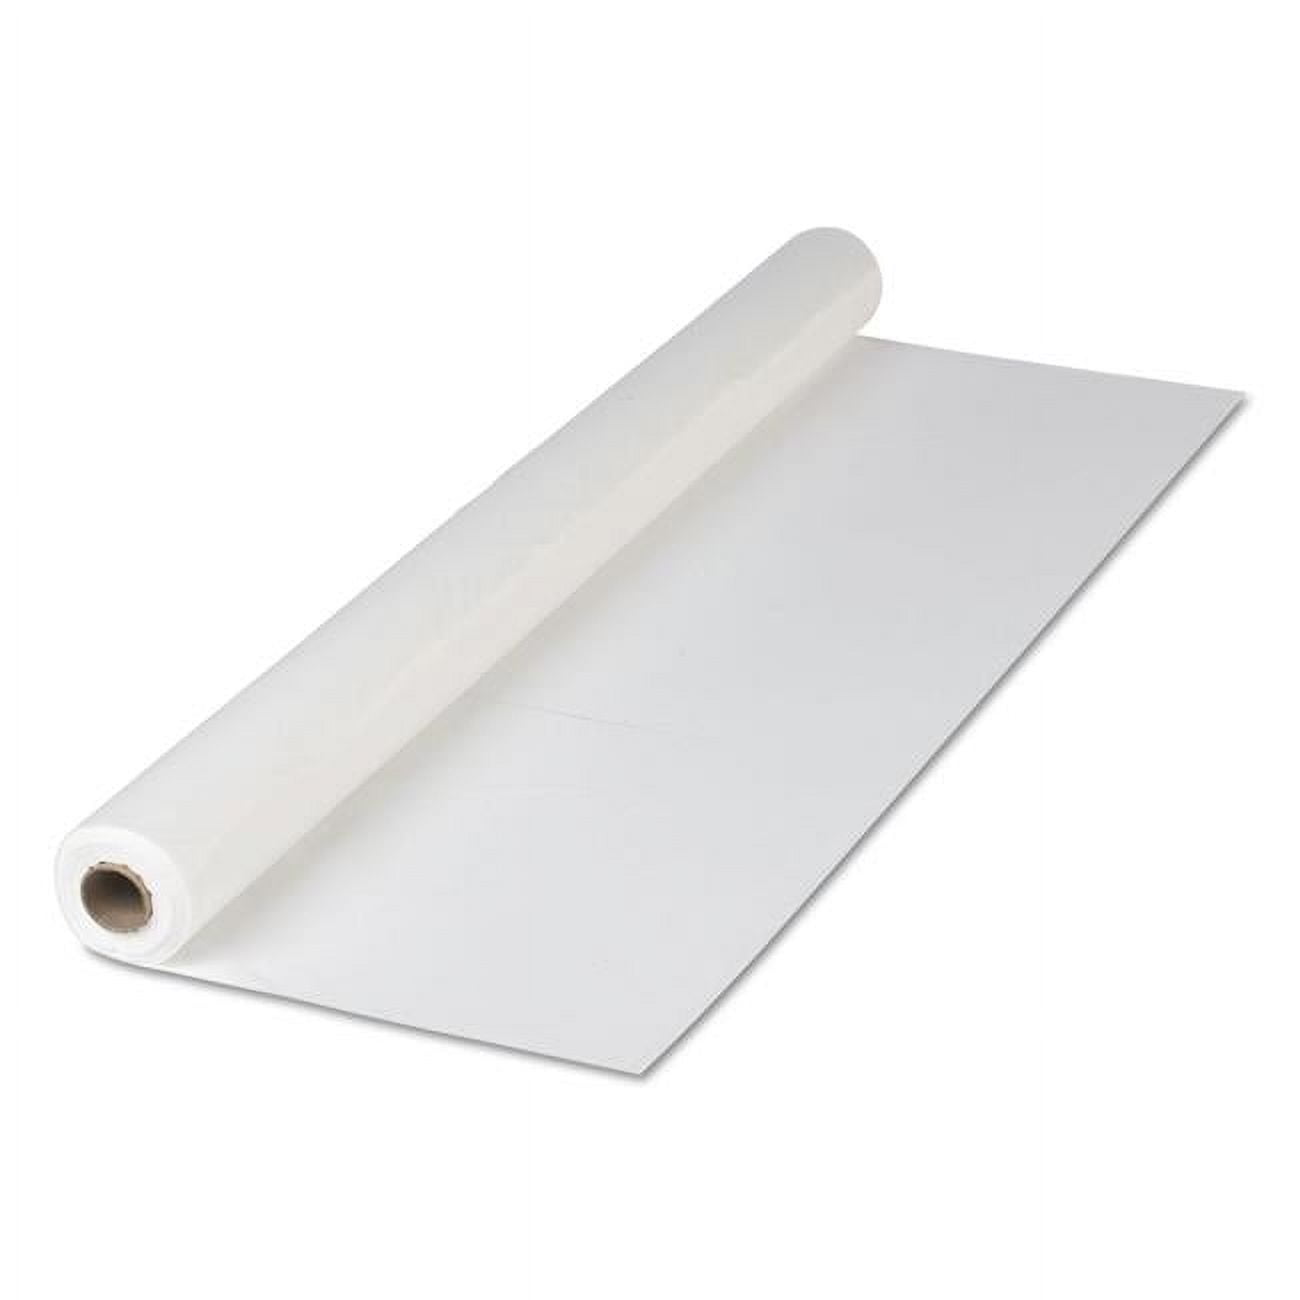 Hoffmaster 260047 40 x 100' Linen-Like White Paper Roll Table Cover